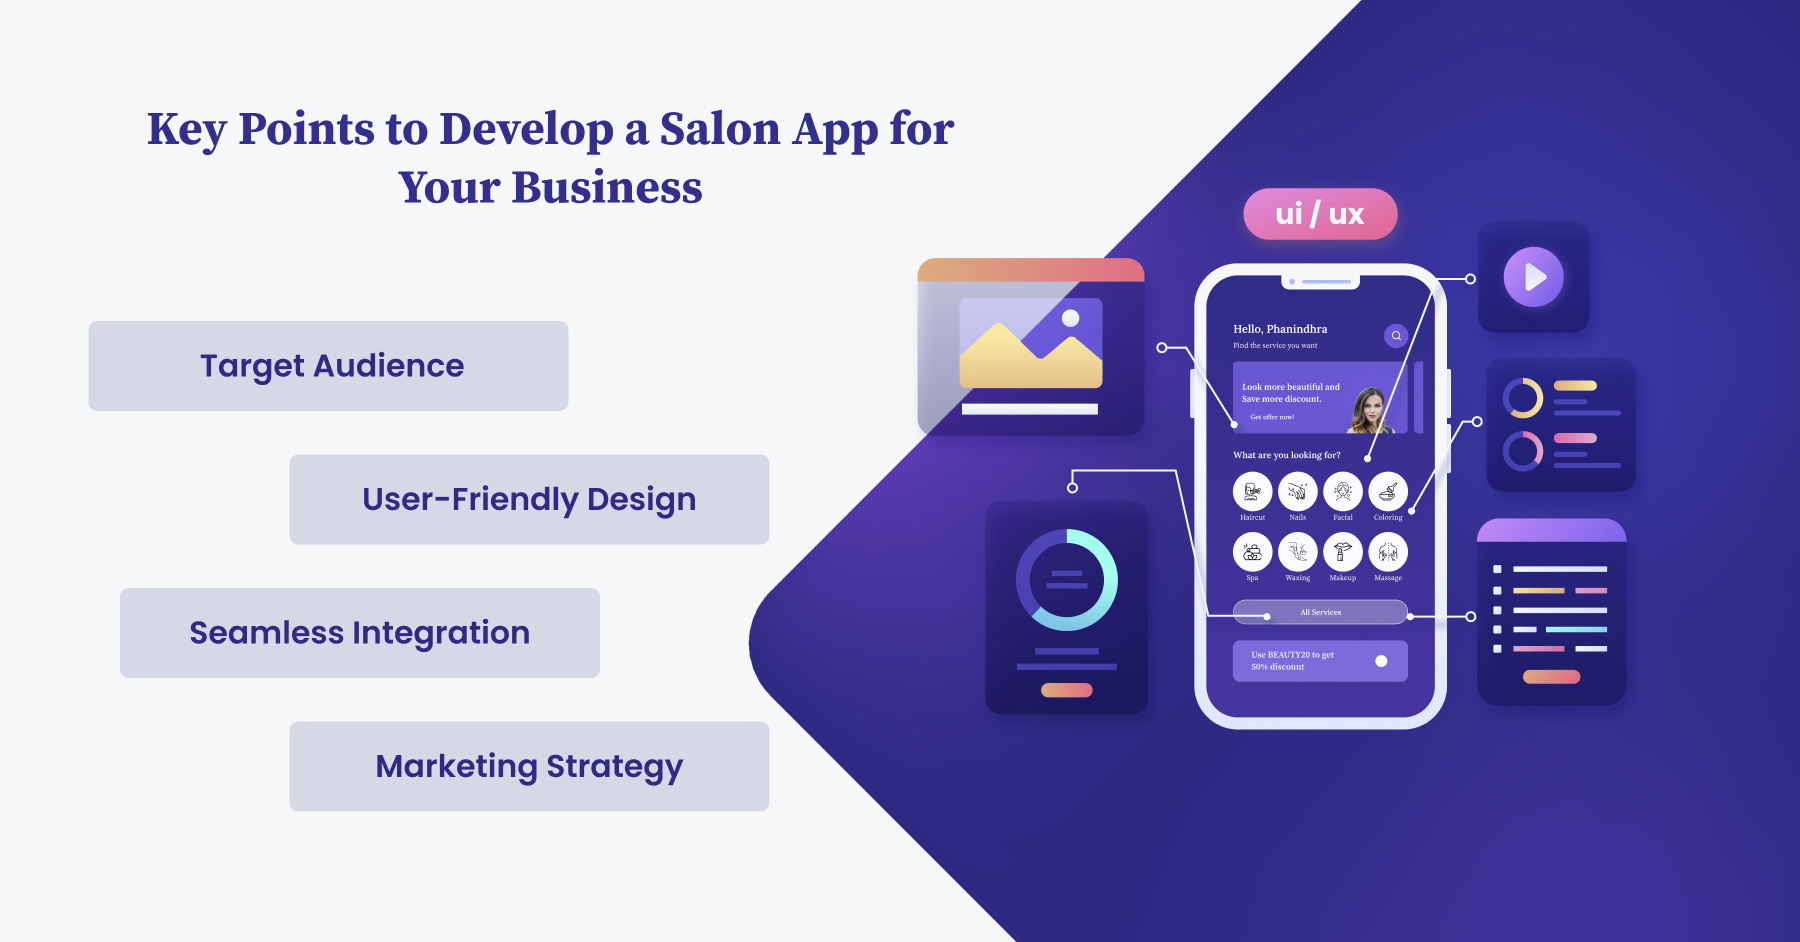 Key Points to Develop a Salon App for Your Business